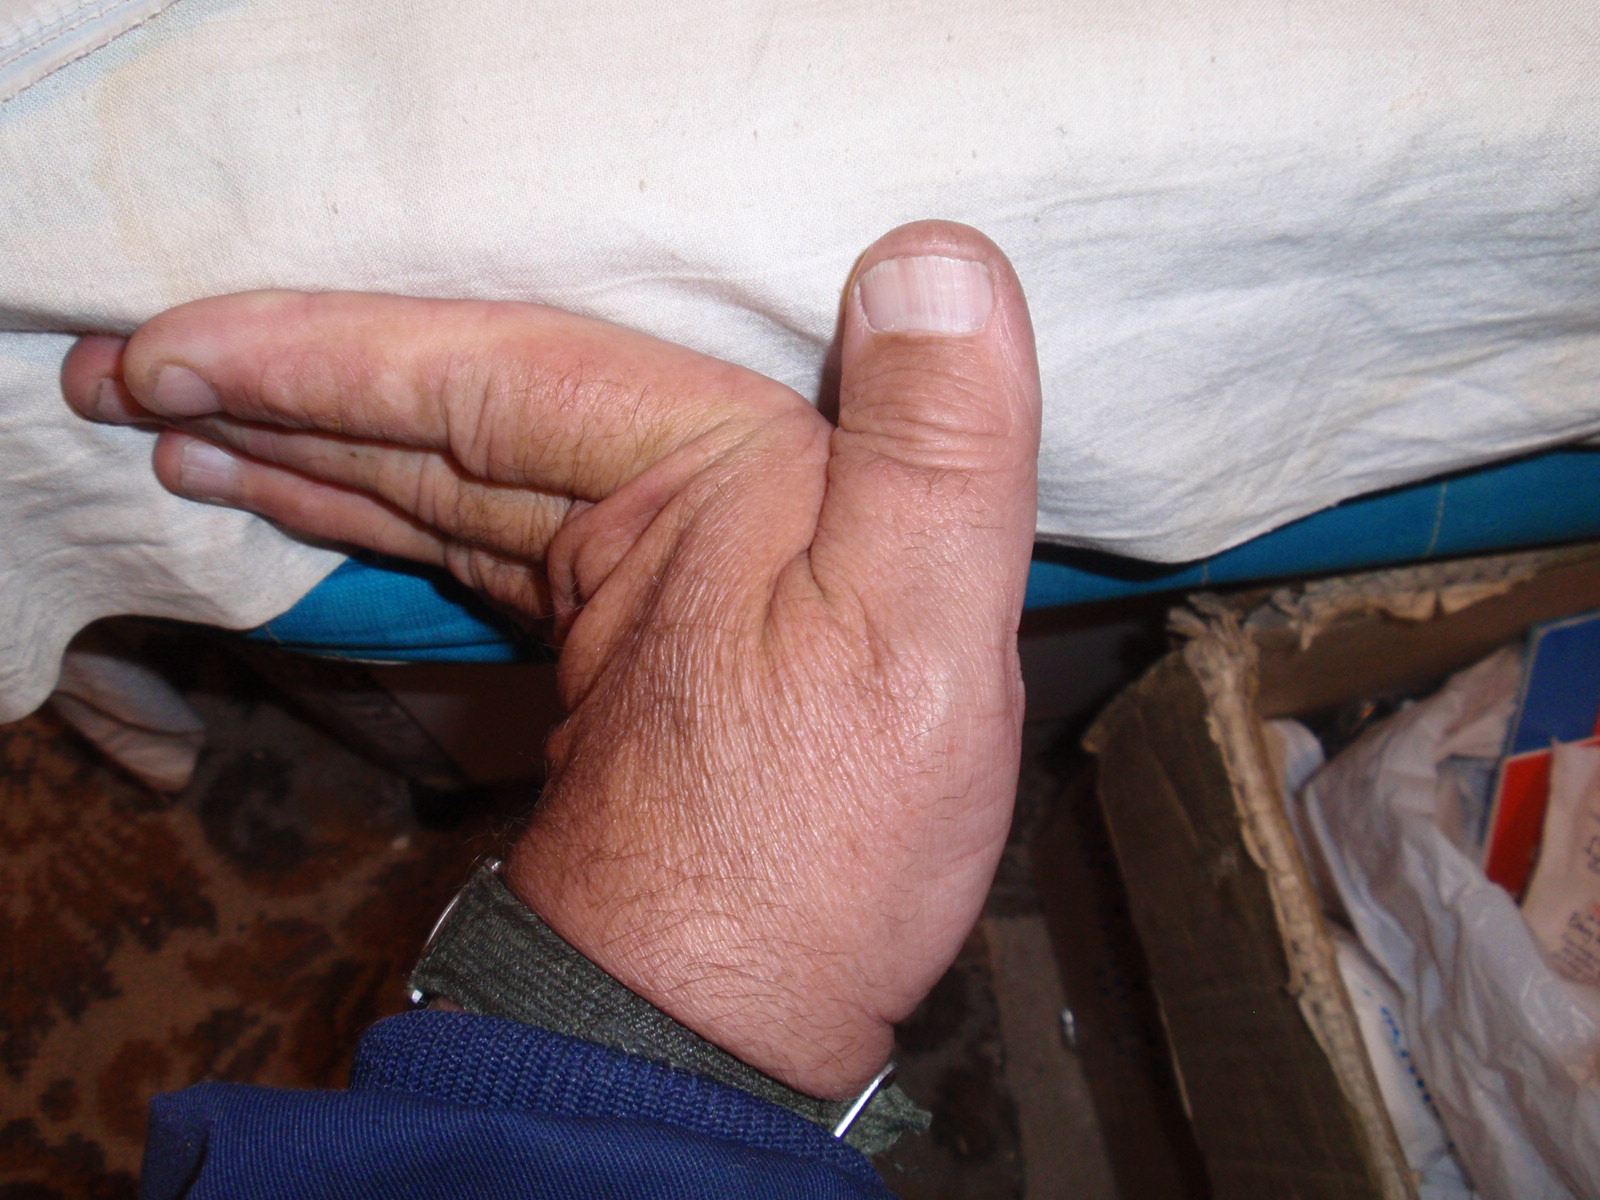 Hypermobile fingers -- they bend backwards to 90 degrees. By Anthony Appleyard [Public domain], via Wikimedia Commons